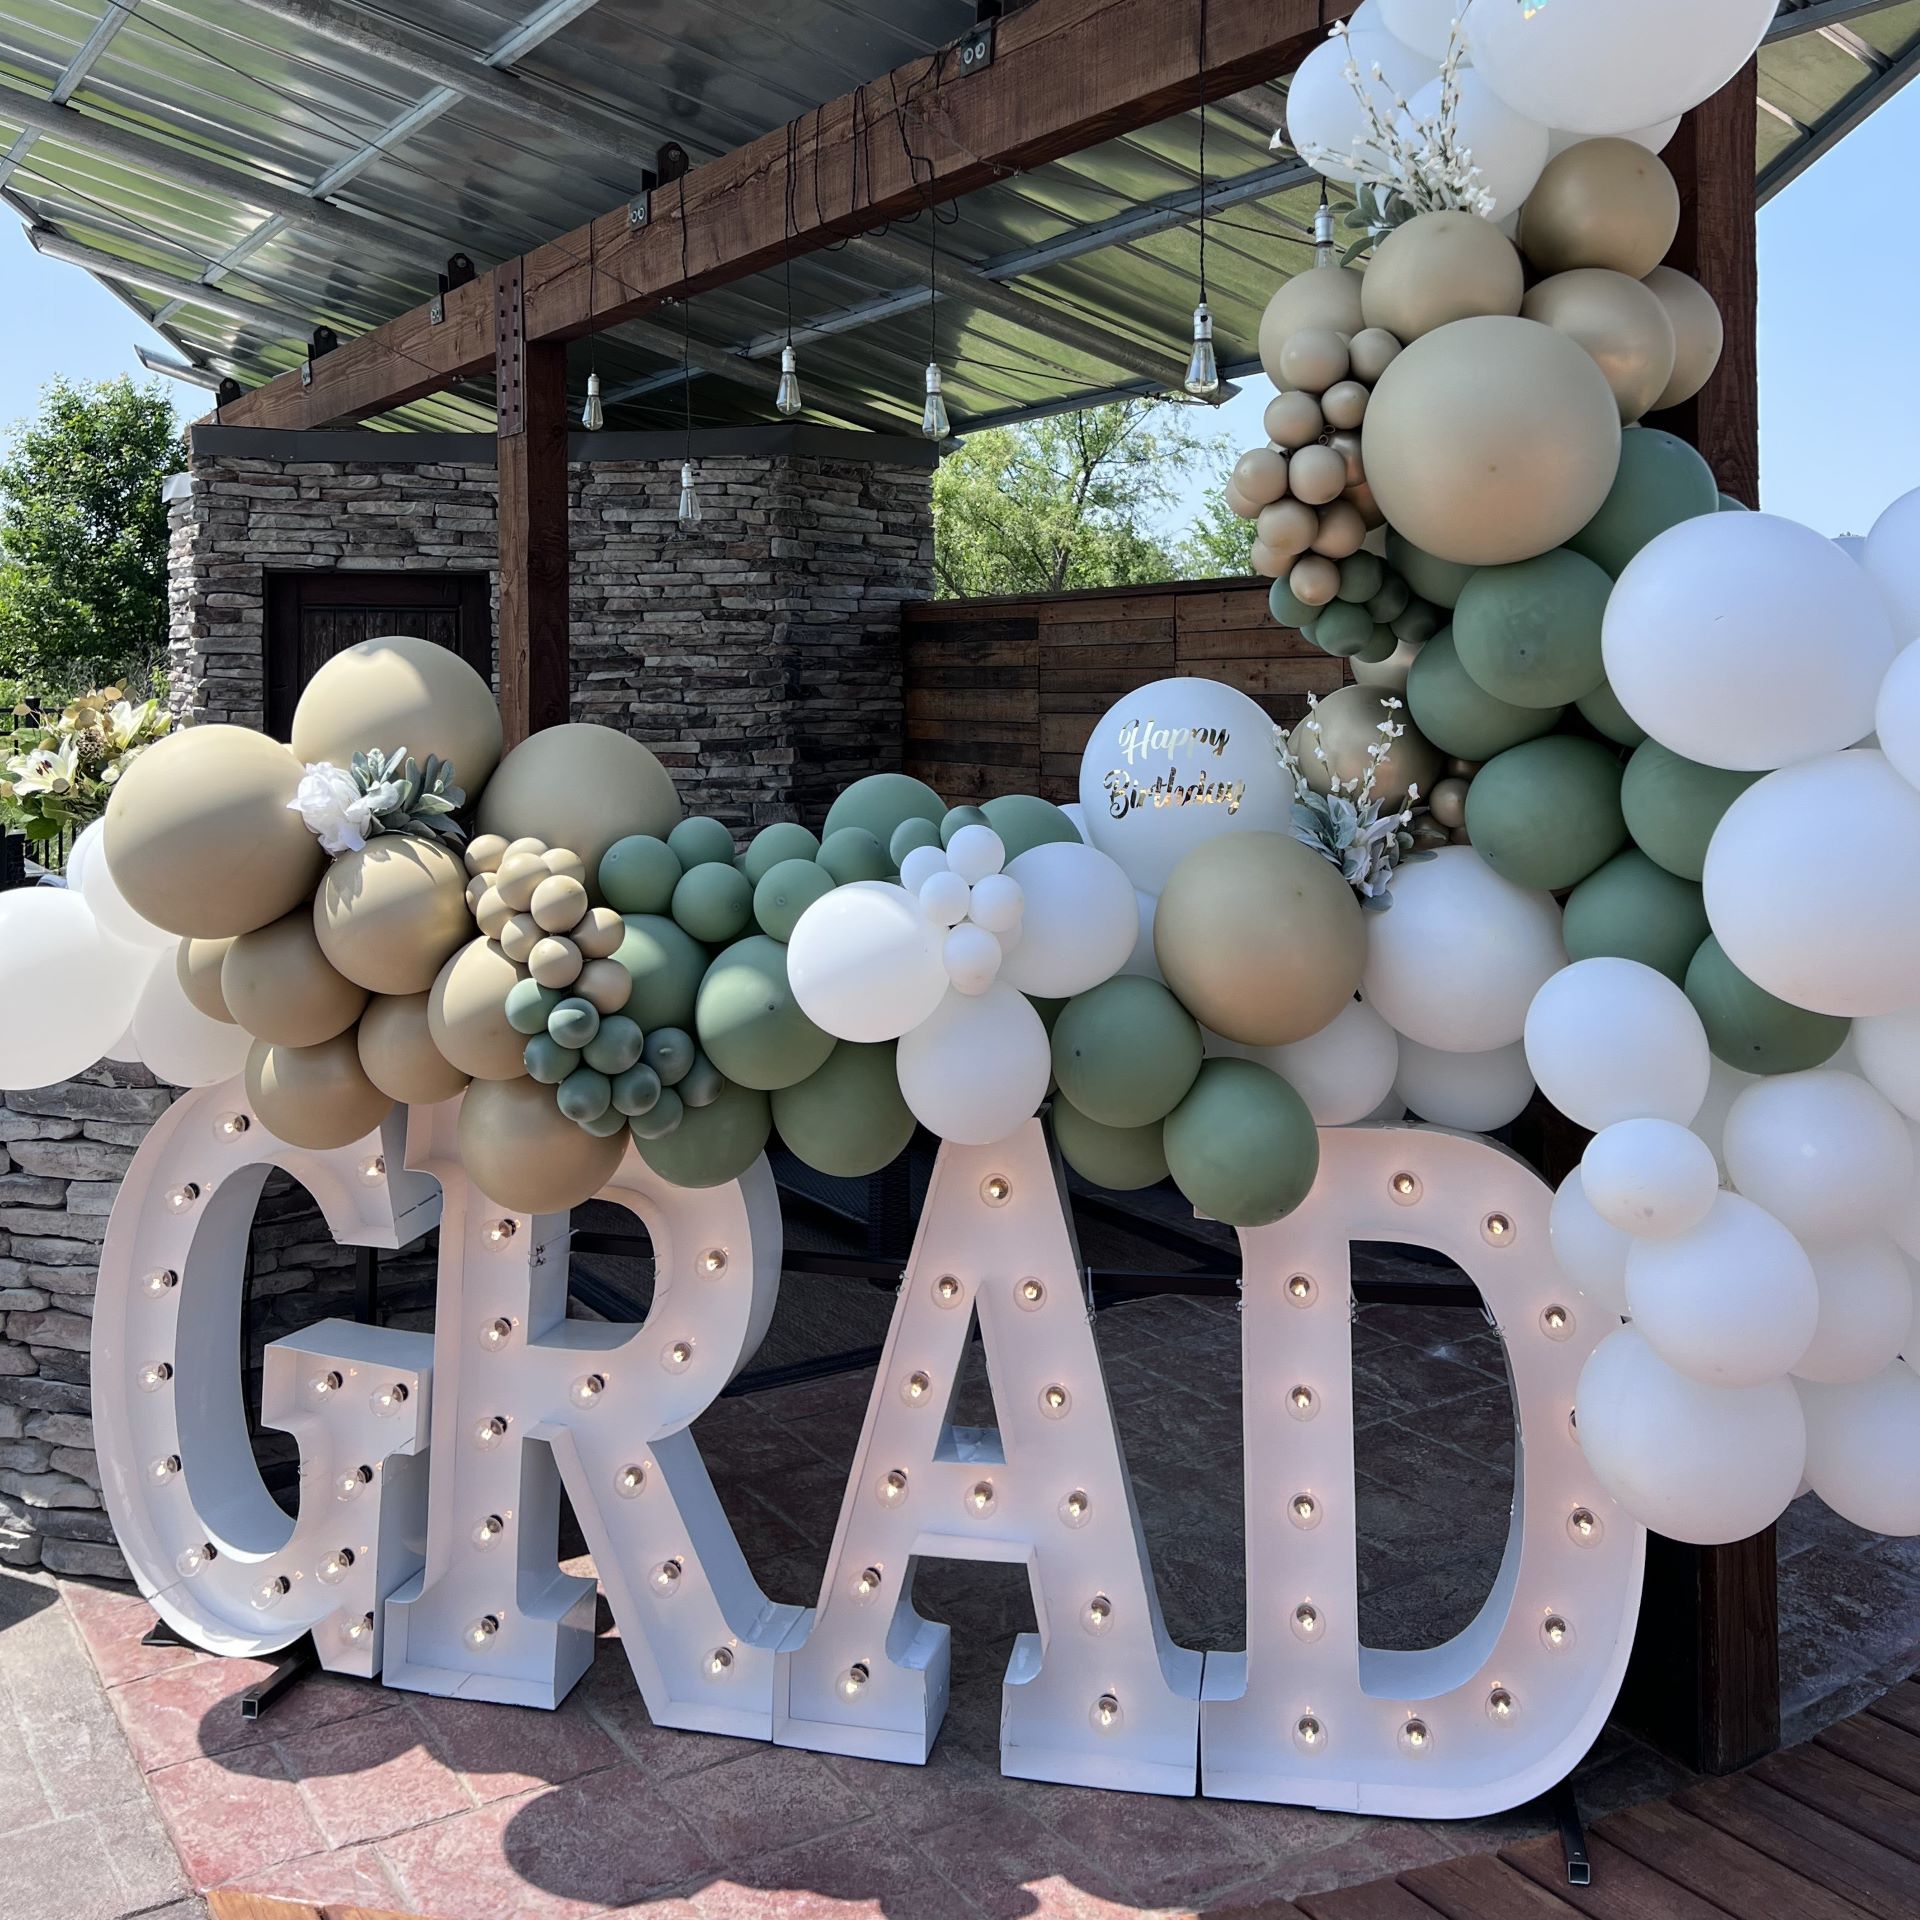 GRAD Marquee Lights with Sage green, white, and gold balloons at an event venue